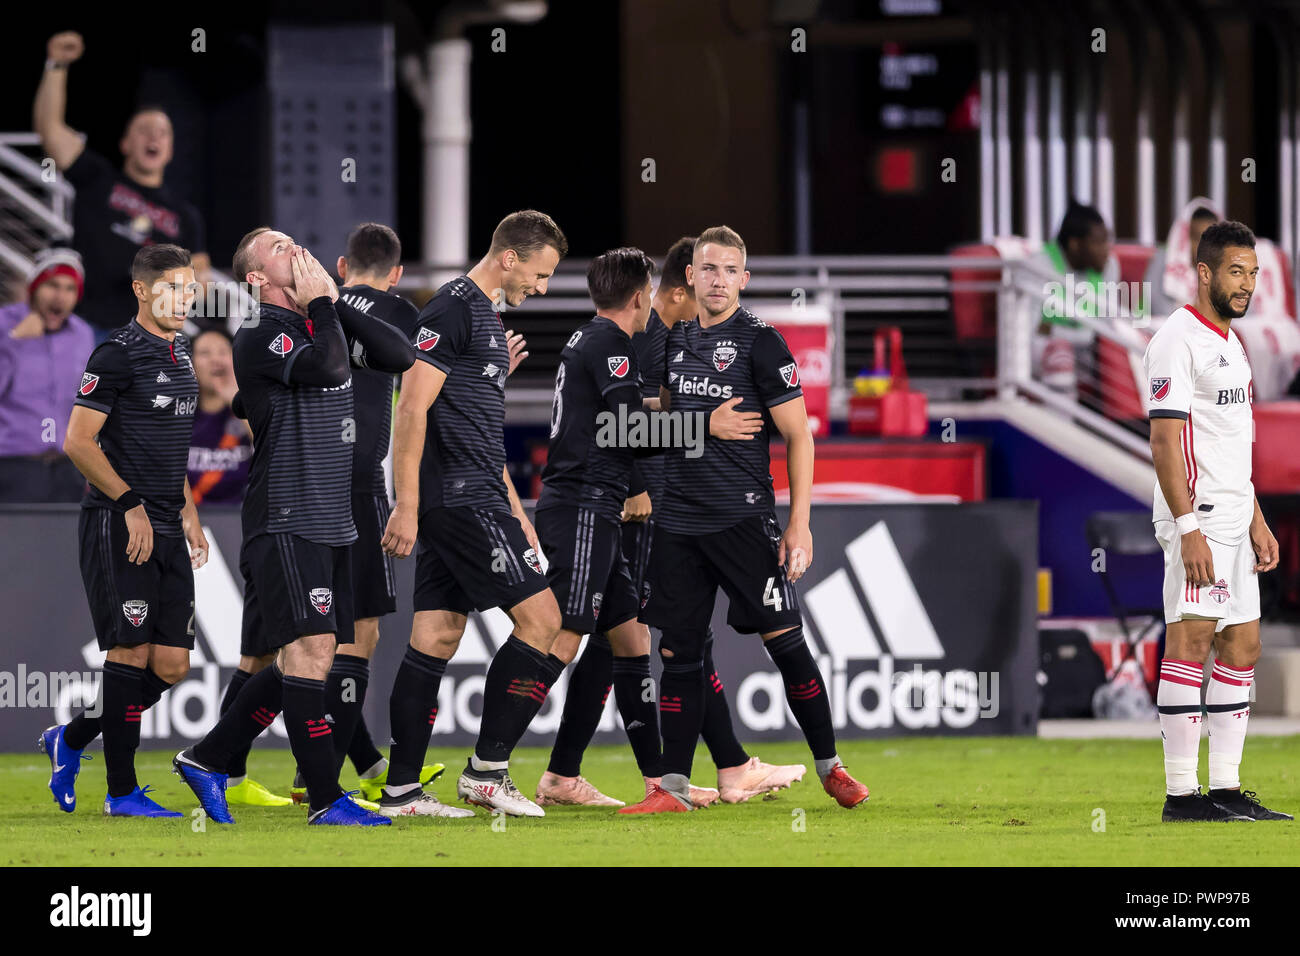 Columbia. 17th Oct, 2018. D.C. United forward Wayne Rooney (9) celebrates with teammates after scoring during the MLS game between D.C. United and Toronto FC at Audi Field in Washington, District of Columbia. Scott Taetsch/CSM/Alamy Live News Stock Photo